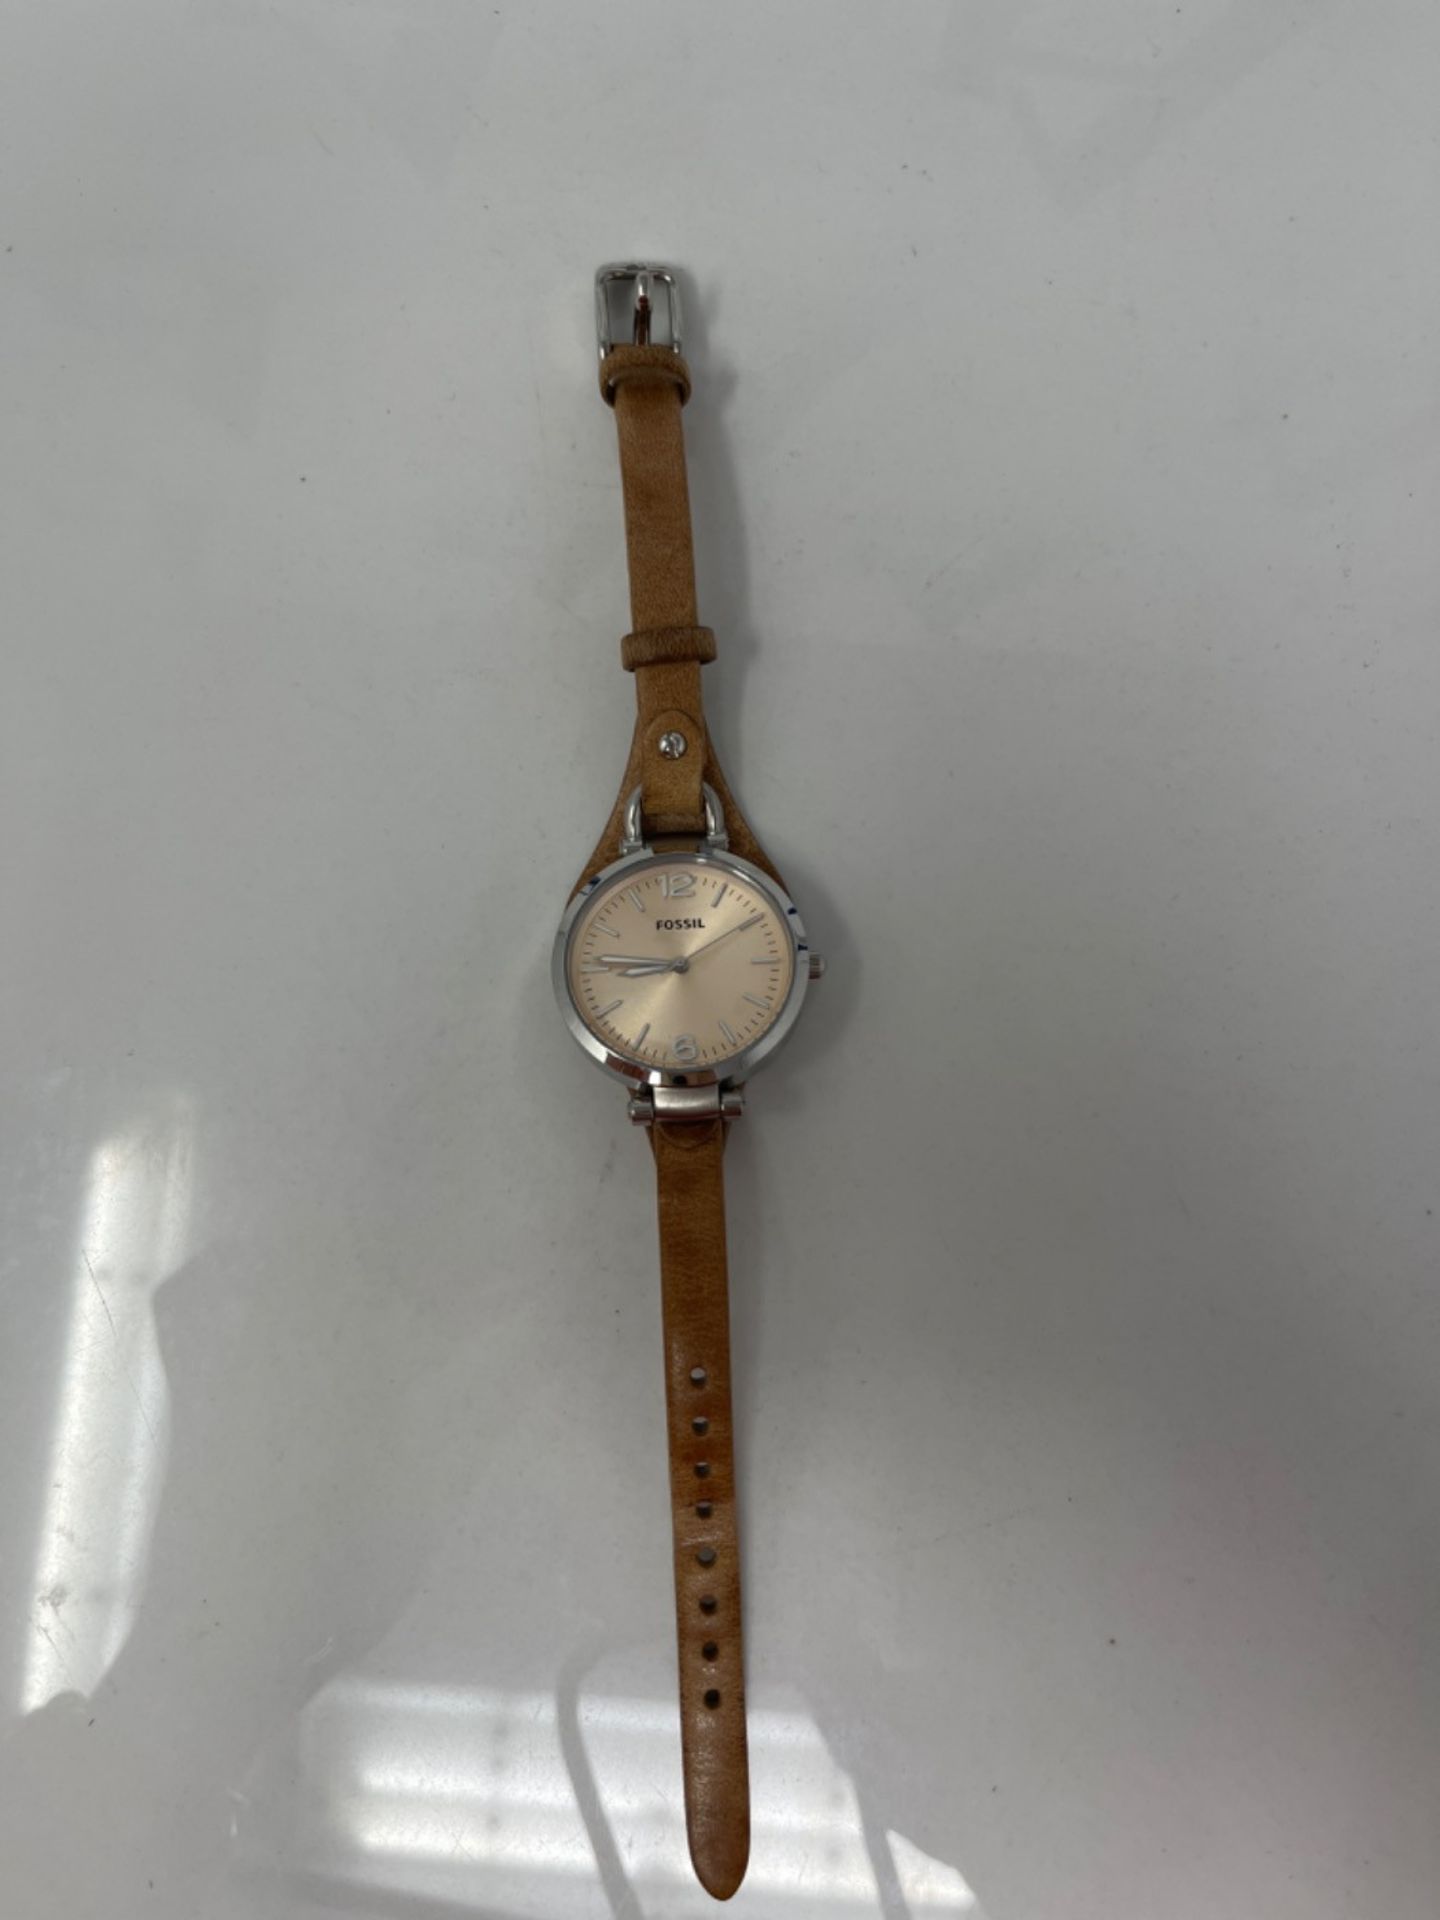 RRP £79.00 FOSSIL Womens Watch Georgia, 32mm case size, Quartz movement, Leather strap - Image 3 of 3